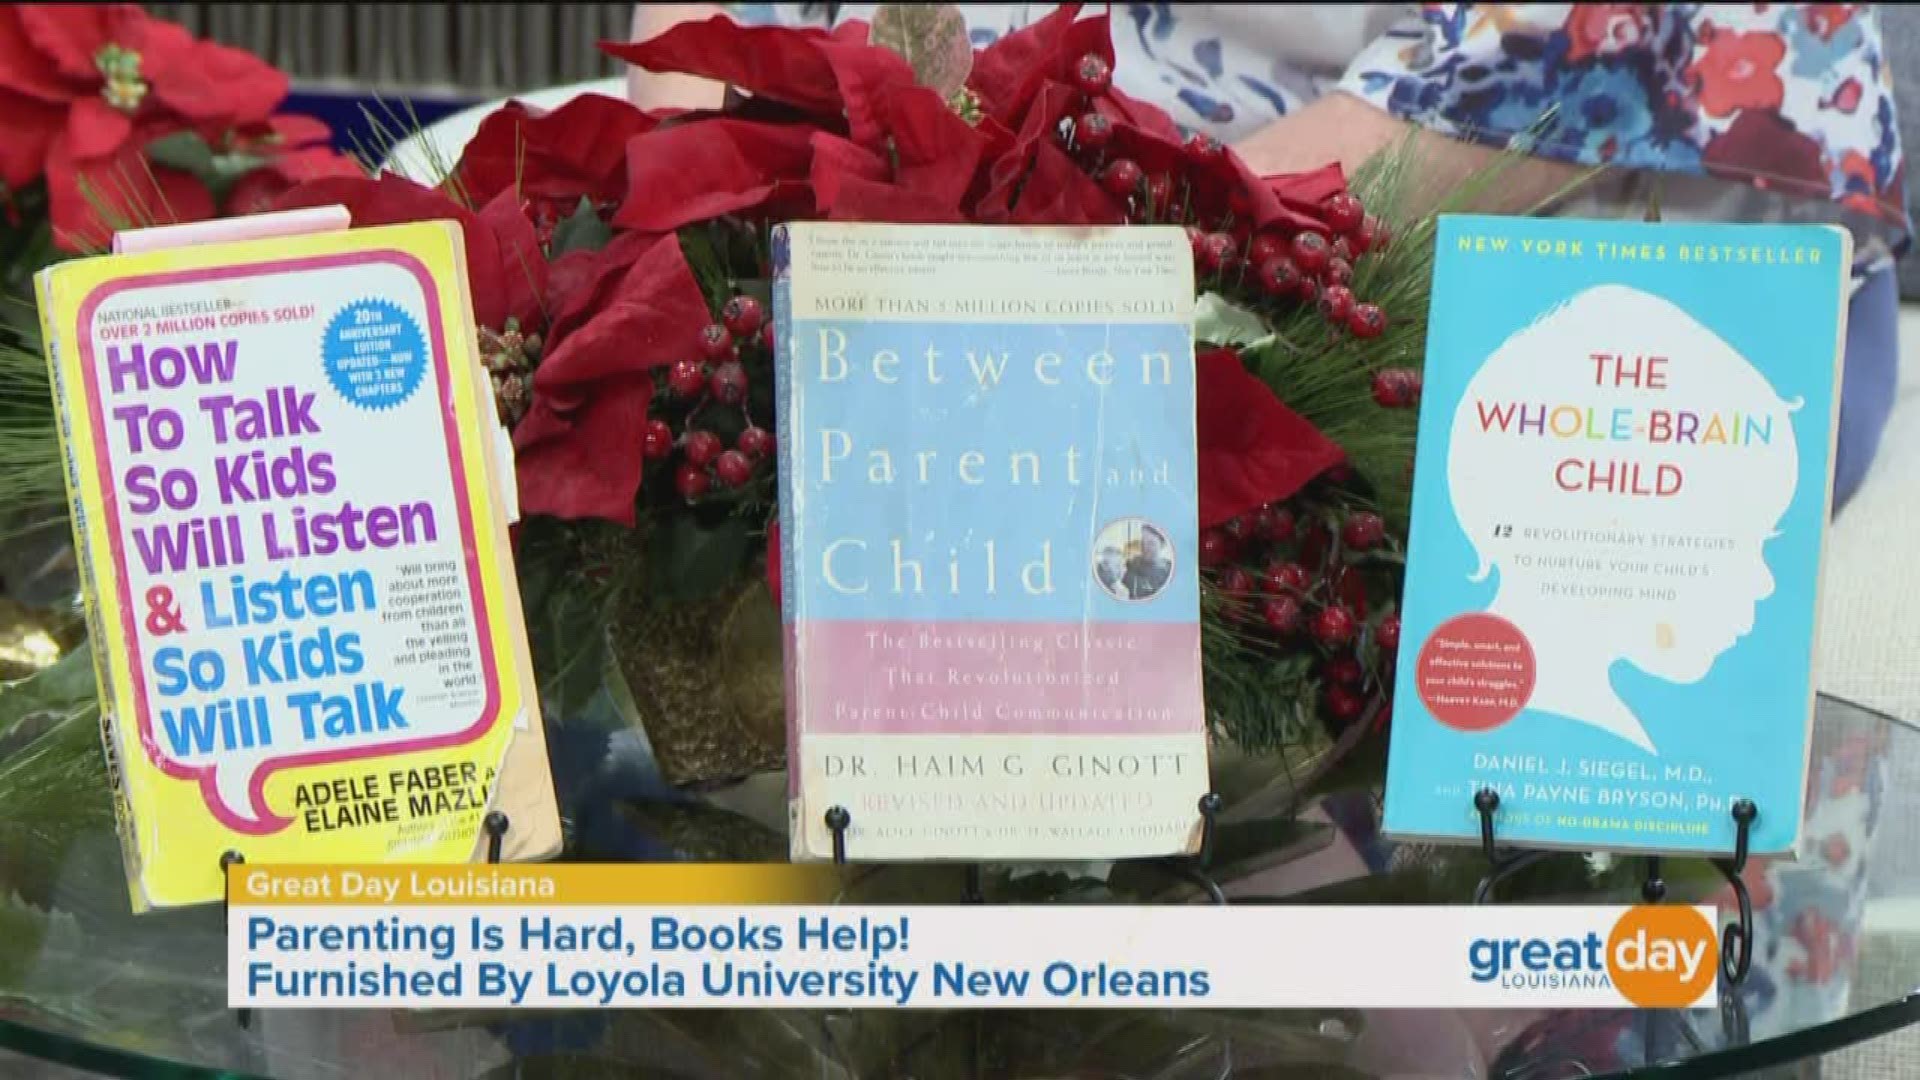 LeAnne Steen, Ph.D. from the Loyola Play Therapy Center stopped by to discuss three books you can use as a parenting resource.